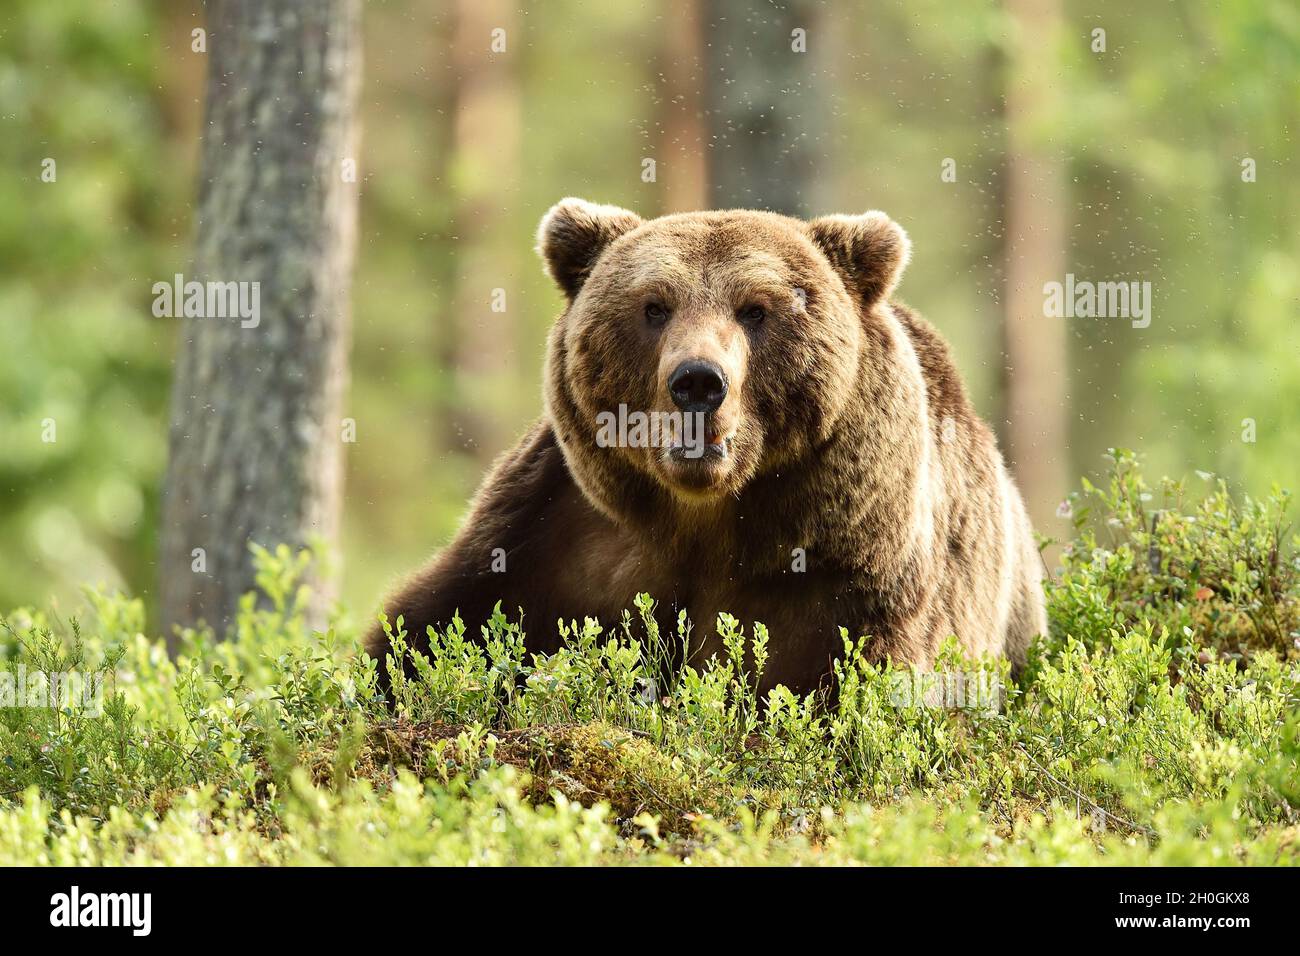 Big male brown bear in forest landscape Stock Photo